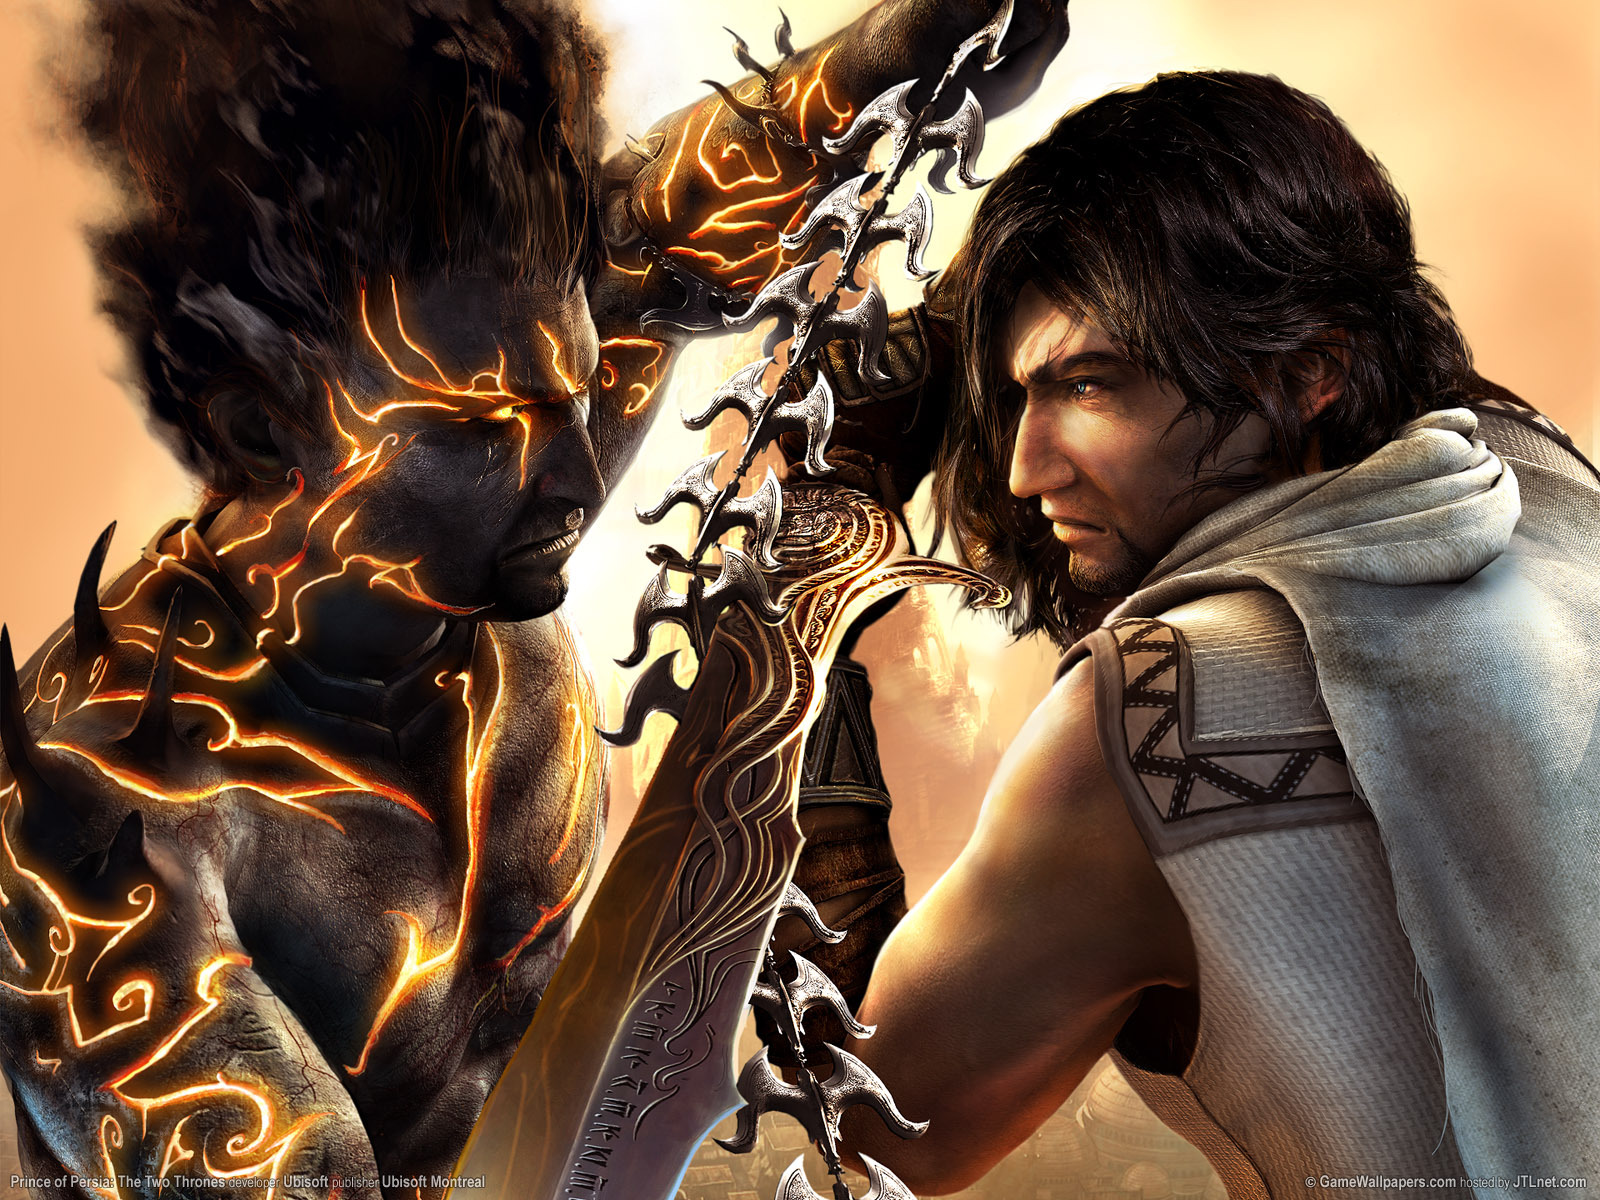 Cool Backgrounds games, men Prince Of Persia